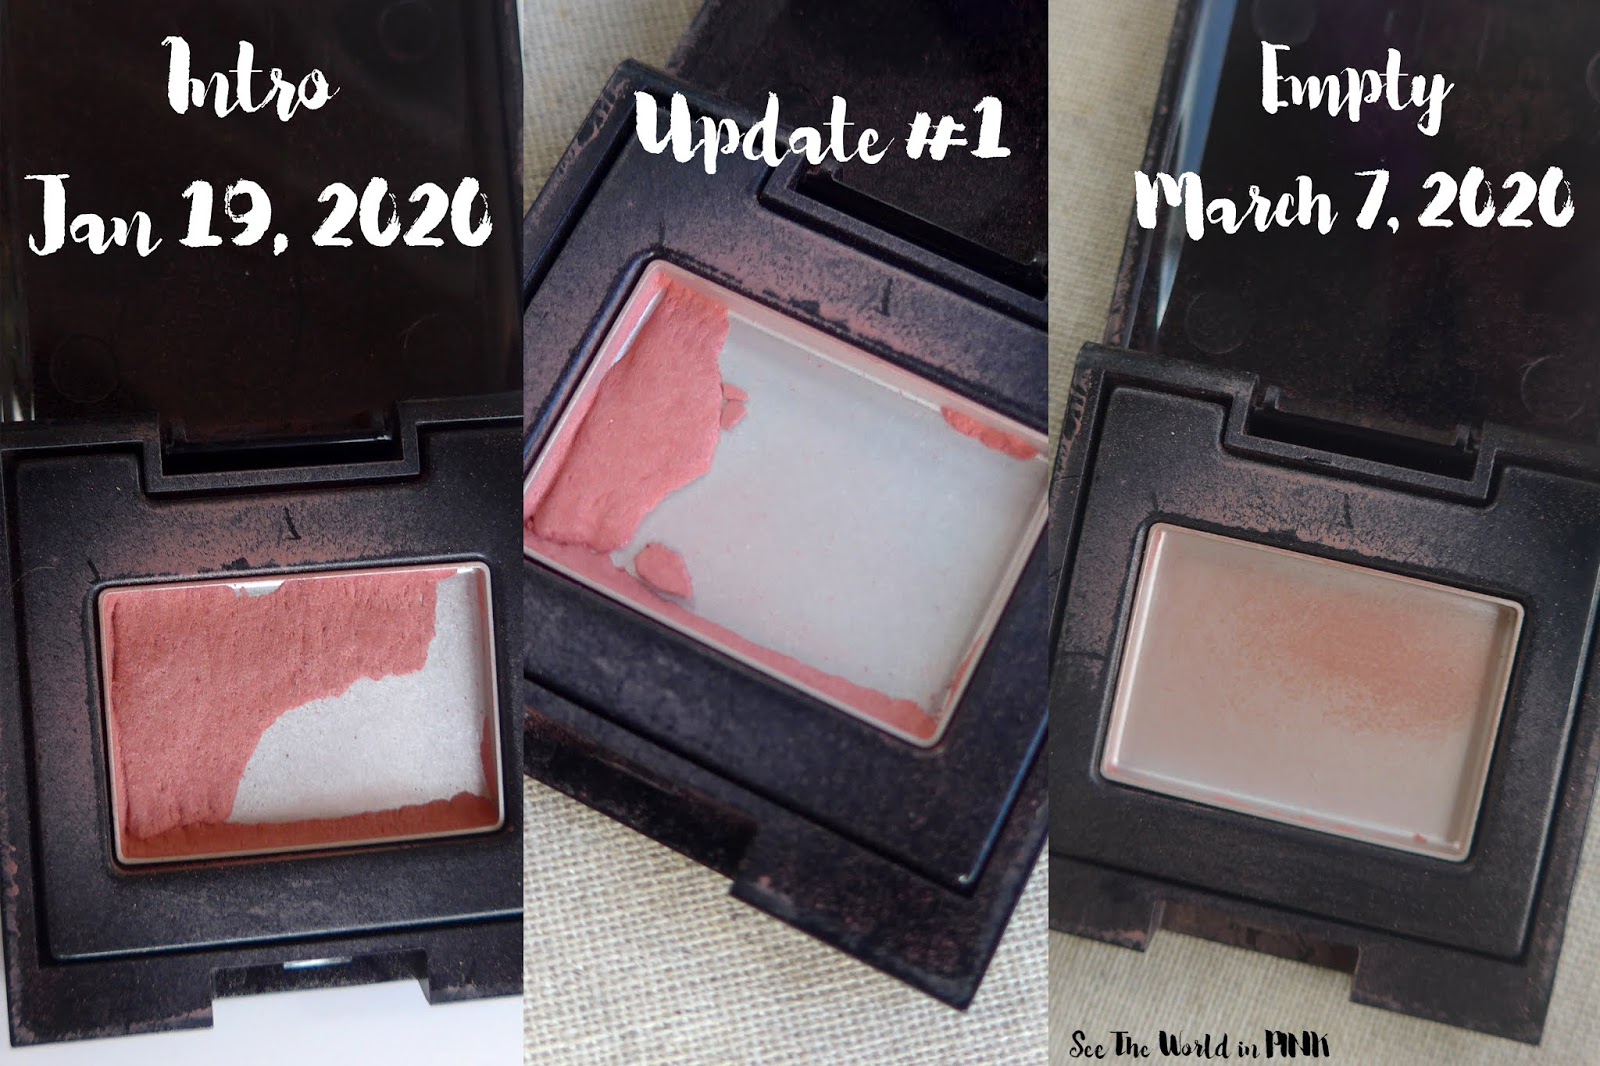 20 in 2020 Project Pan - Update #2